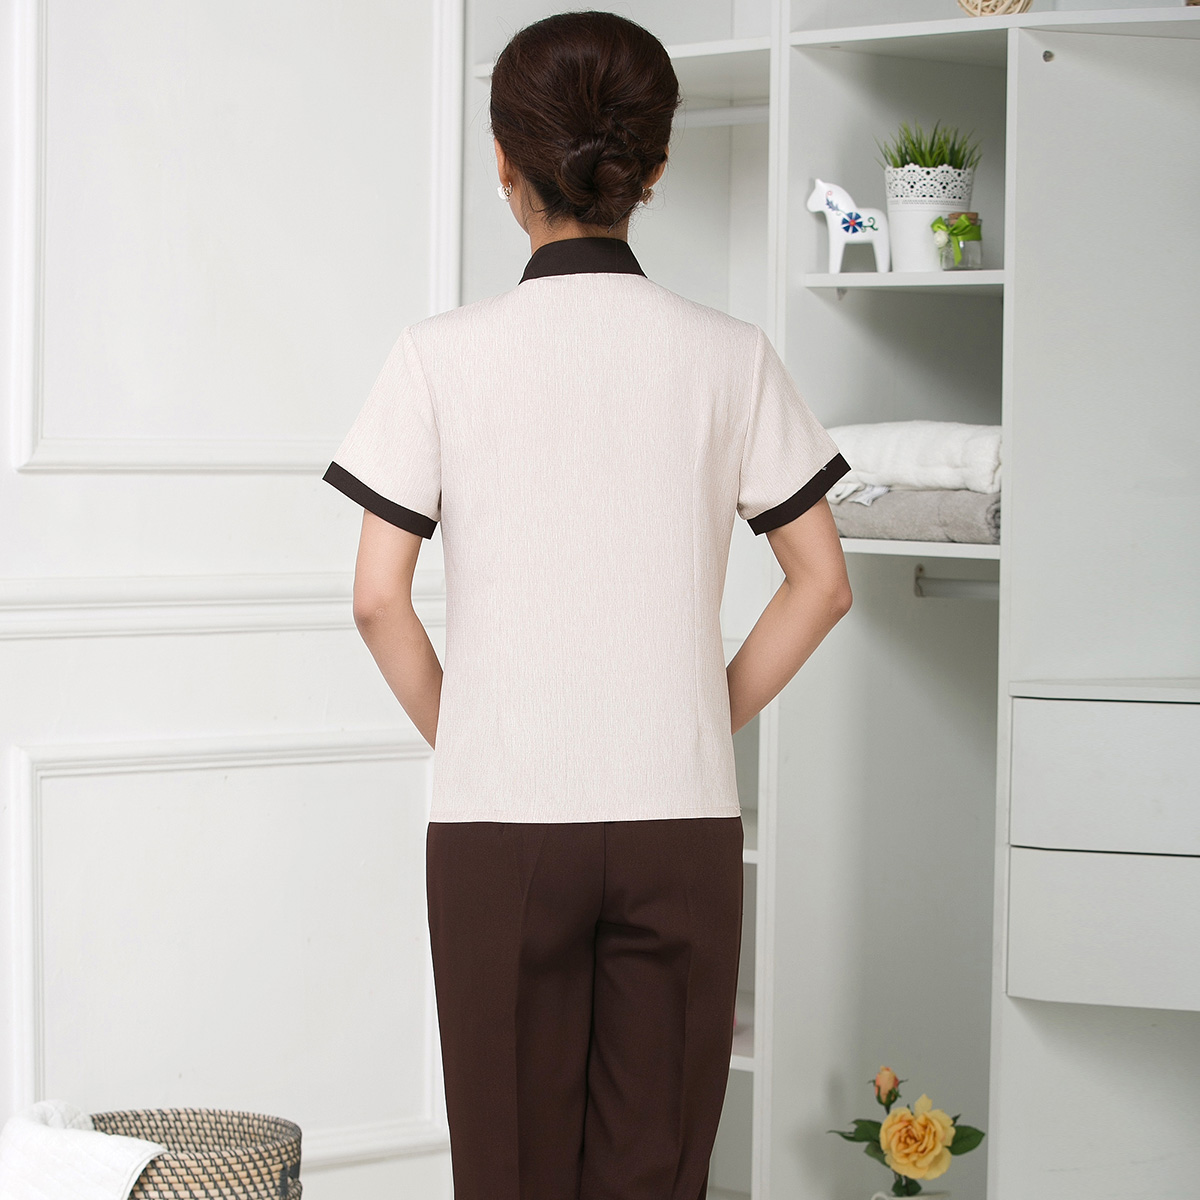 Hotel work clothes summer cleaning clothes for women